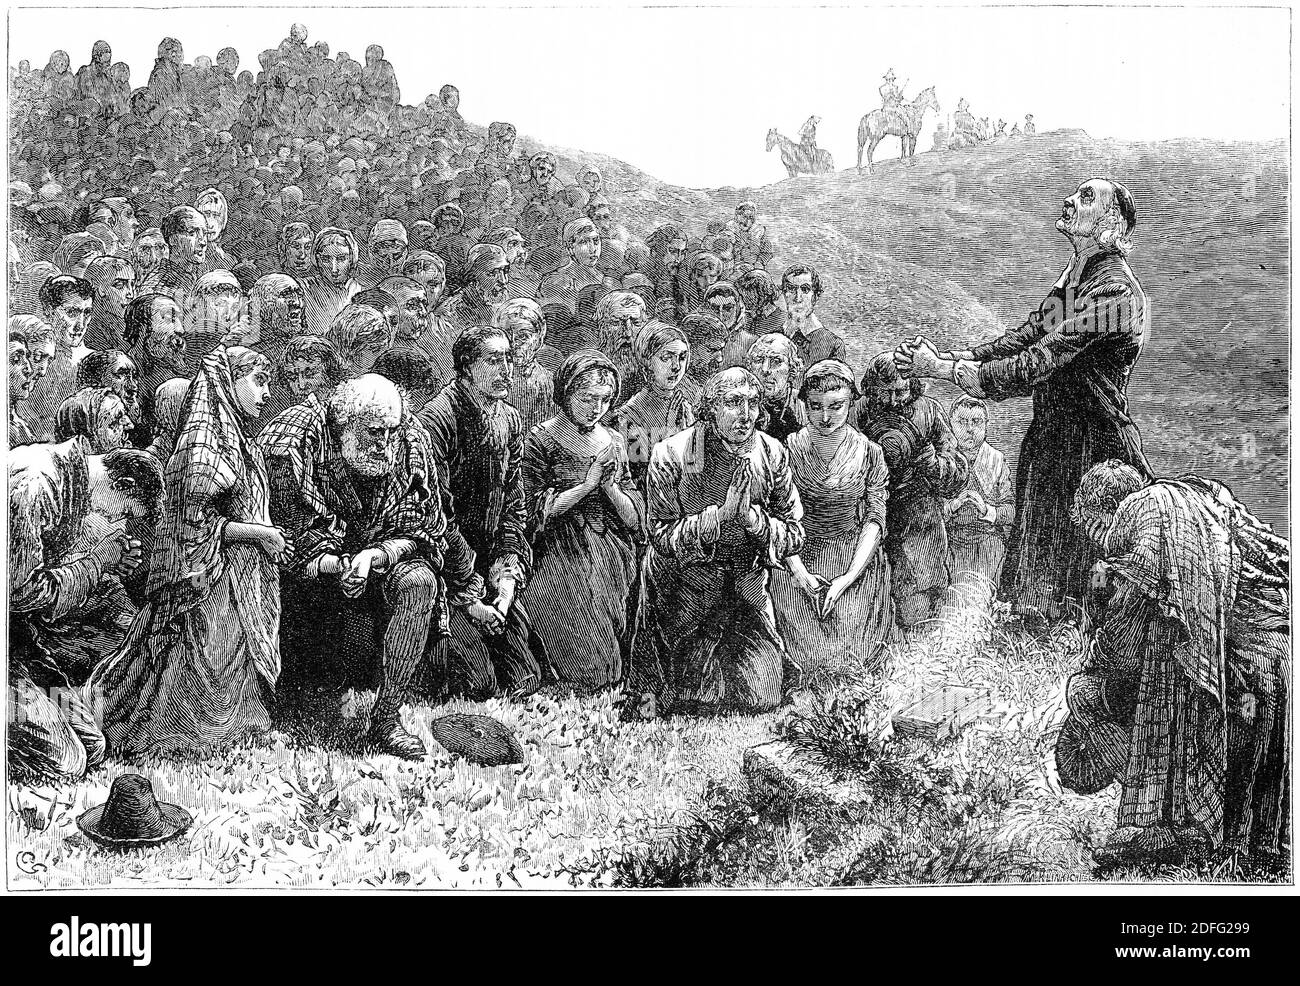 Engraving of Scottish Covenanters worshipping at Whitadder in defiance of English law. Illustration from 'The history of Protestantism' by James Aitken Wylie (1808-1890), pub. 1878 Stock Photo